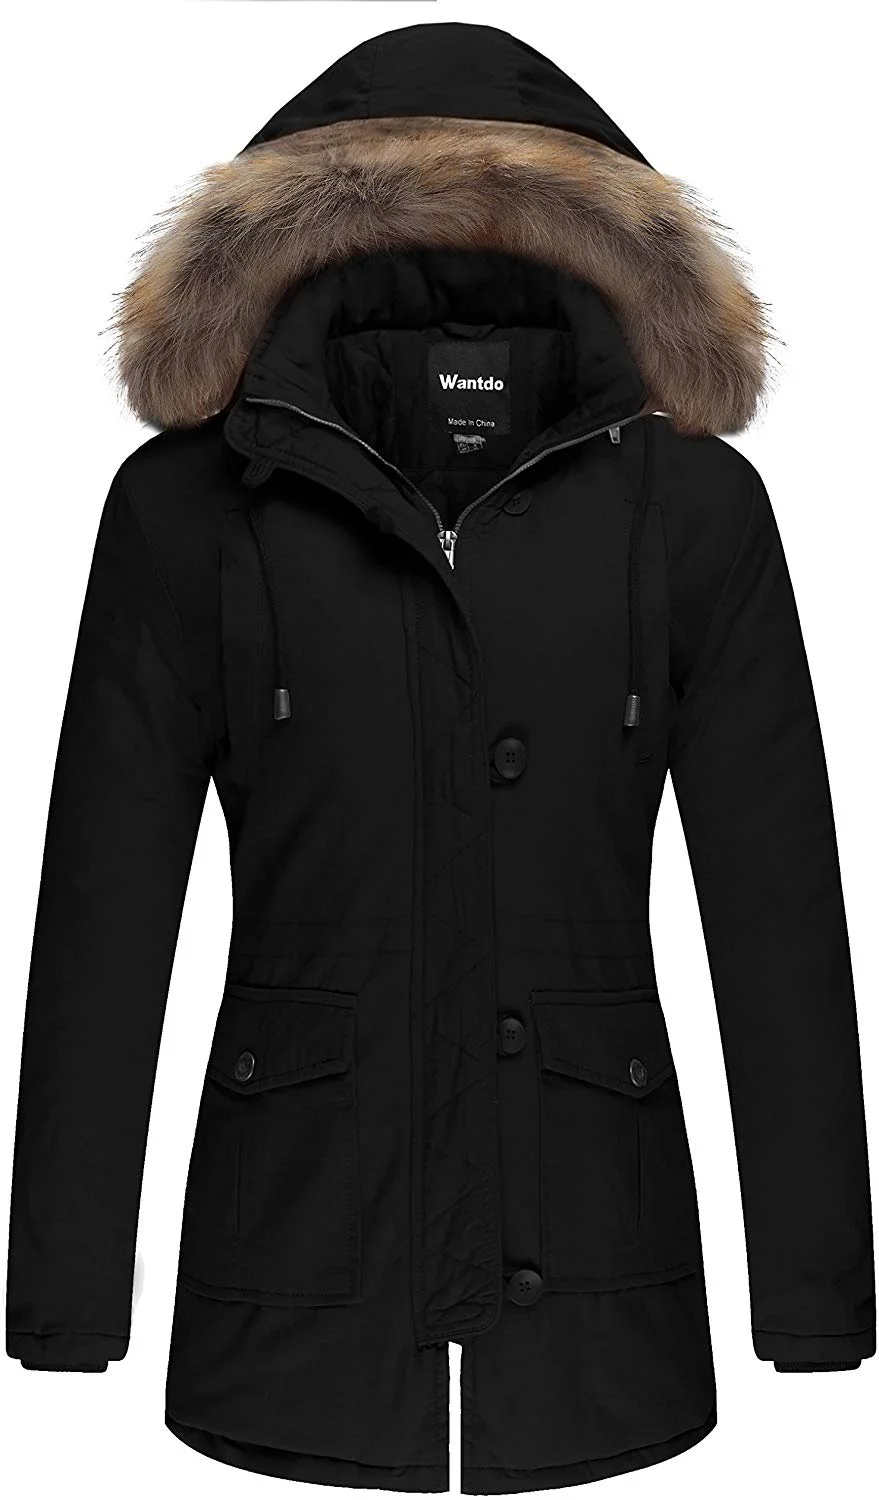 Women's Cotton Thicken Padded Parka Winter Jacket Removable Fur Hood Coat